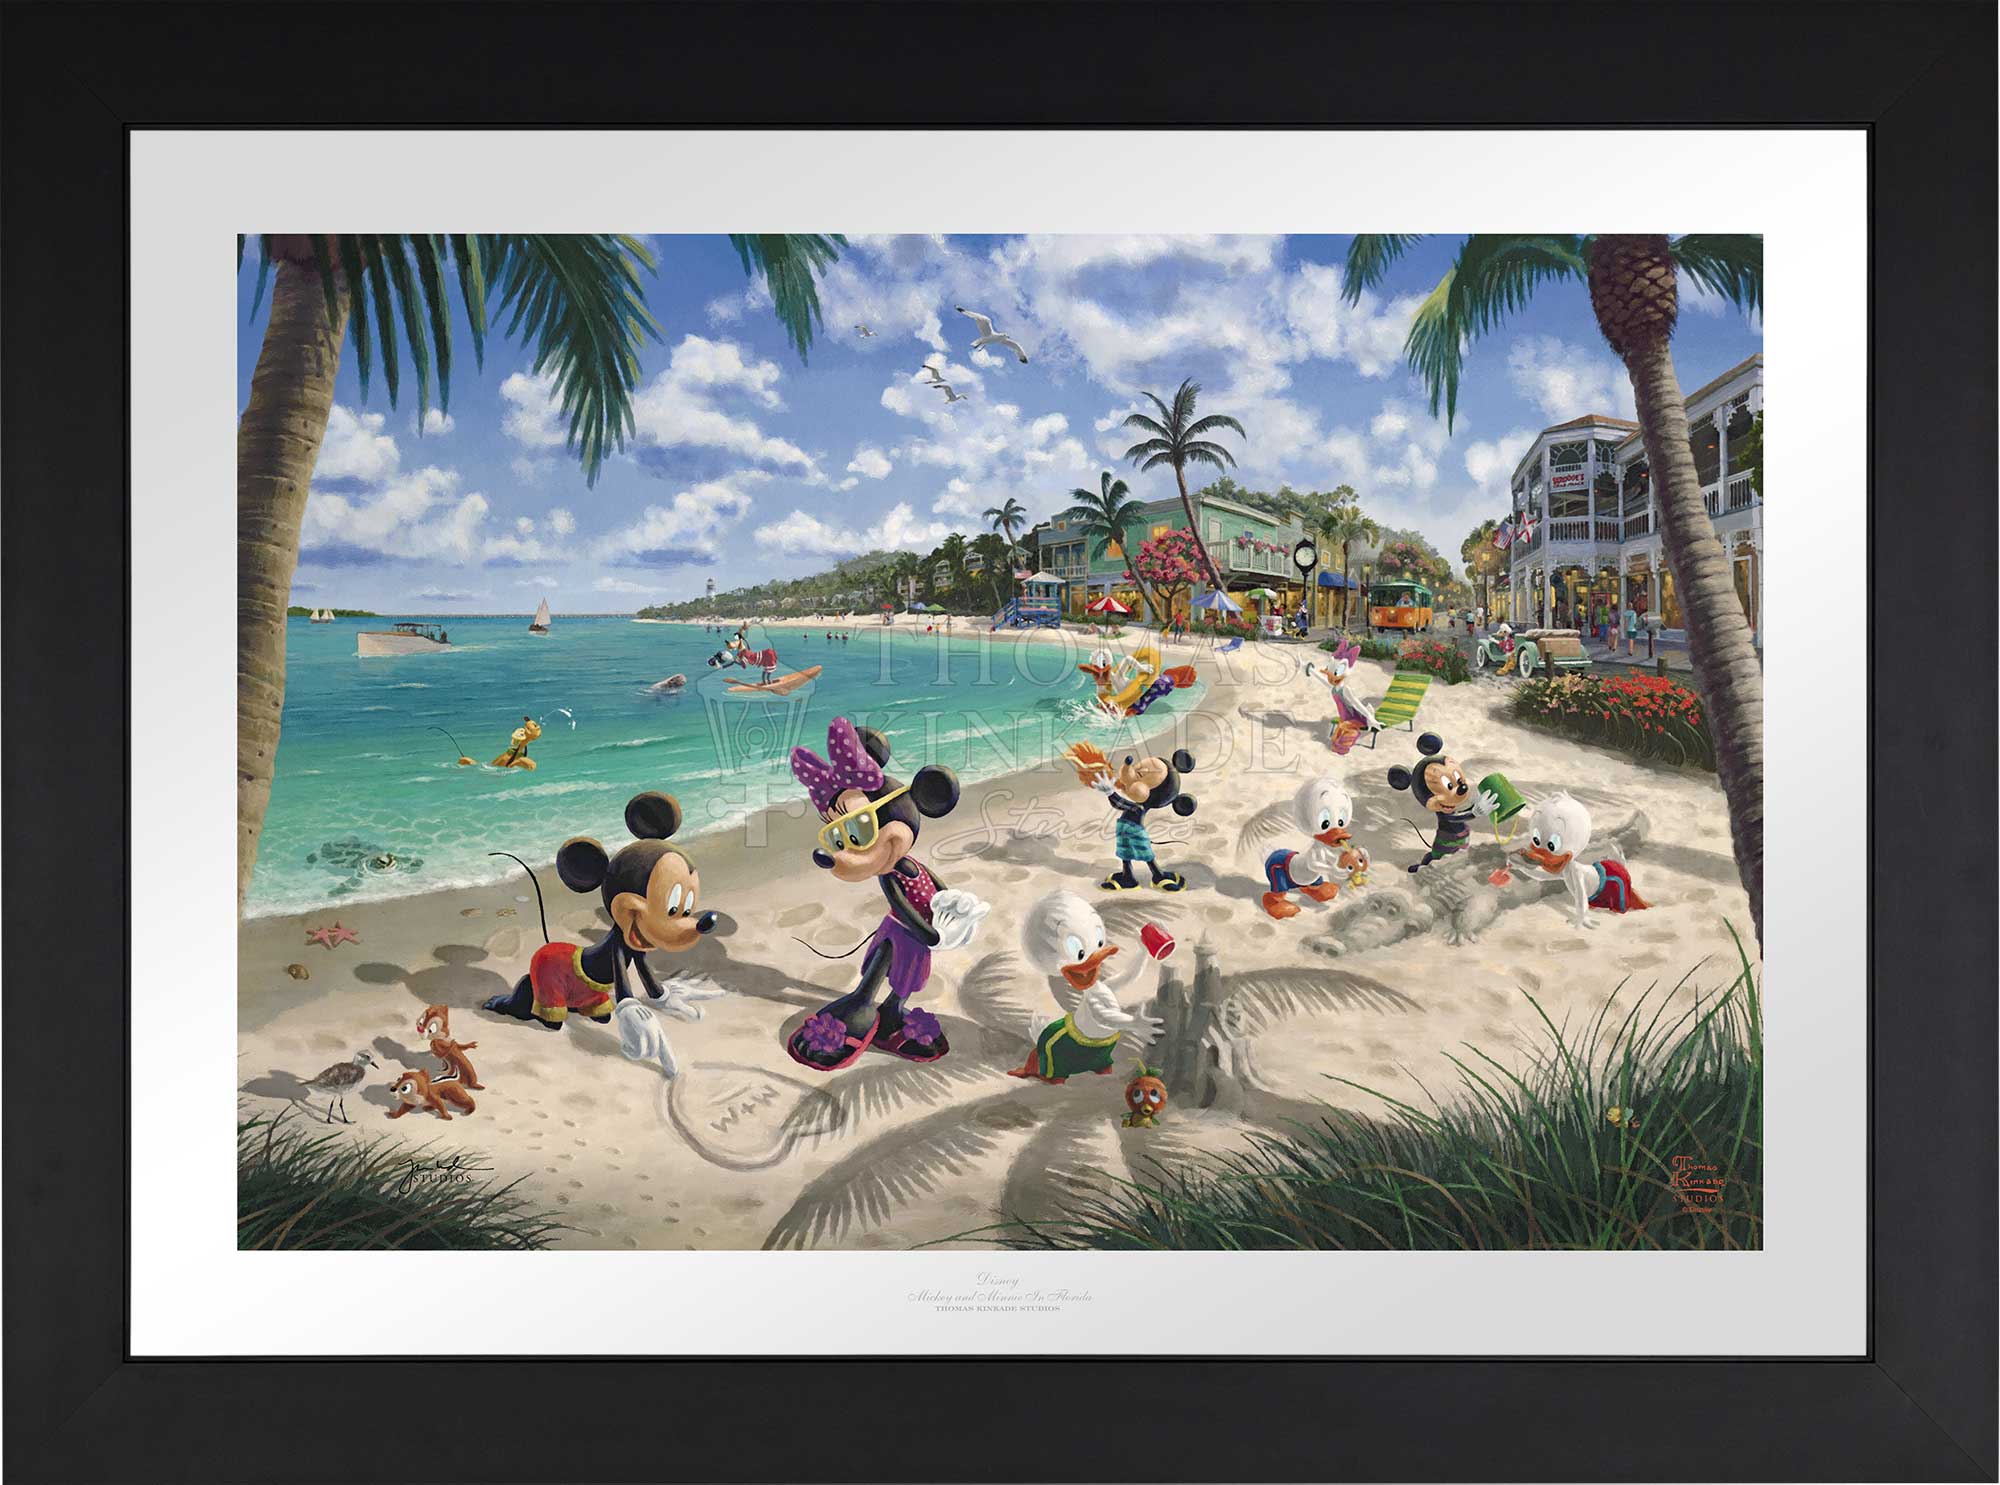 In this scene, Mickey Mouse and Minnie Mouse enjoy a warm afternoon on a sandy Key West beach with family and friends, - Satin Black frame